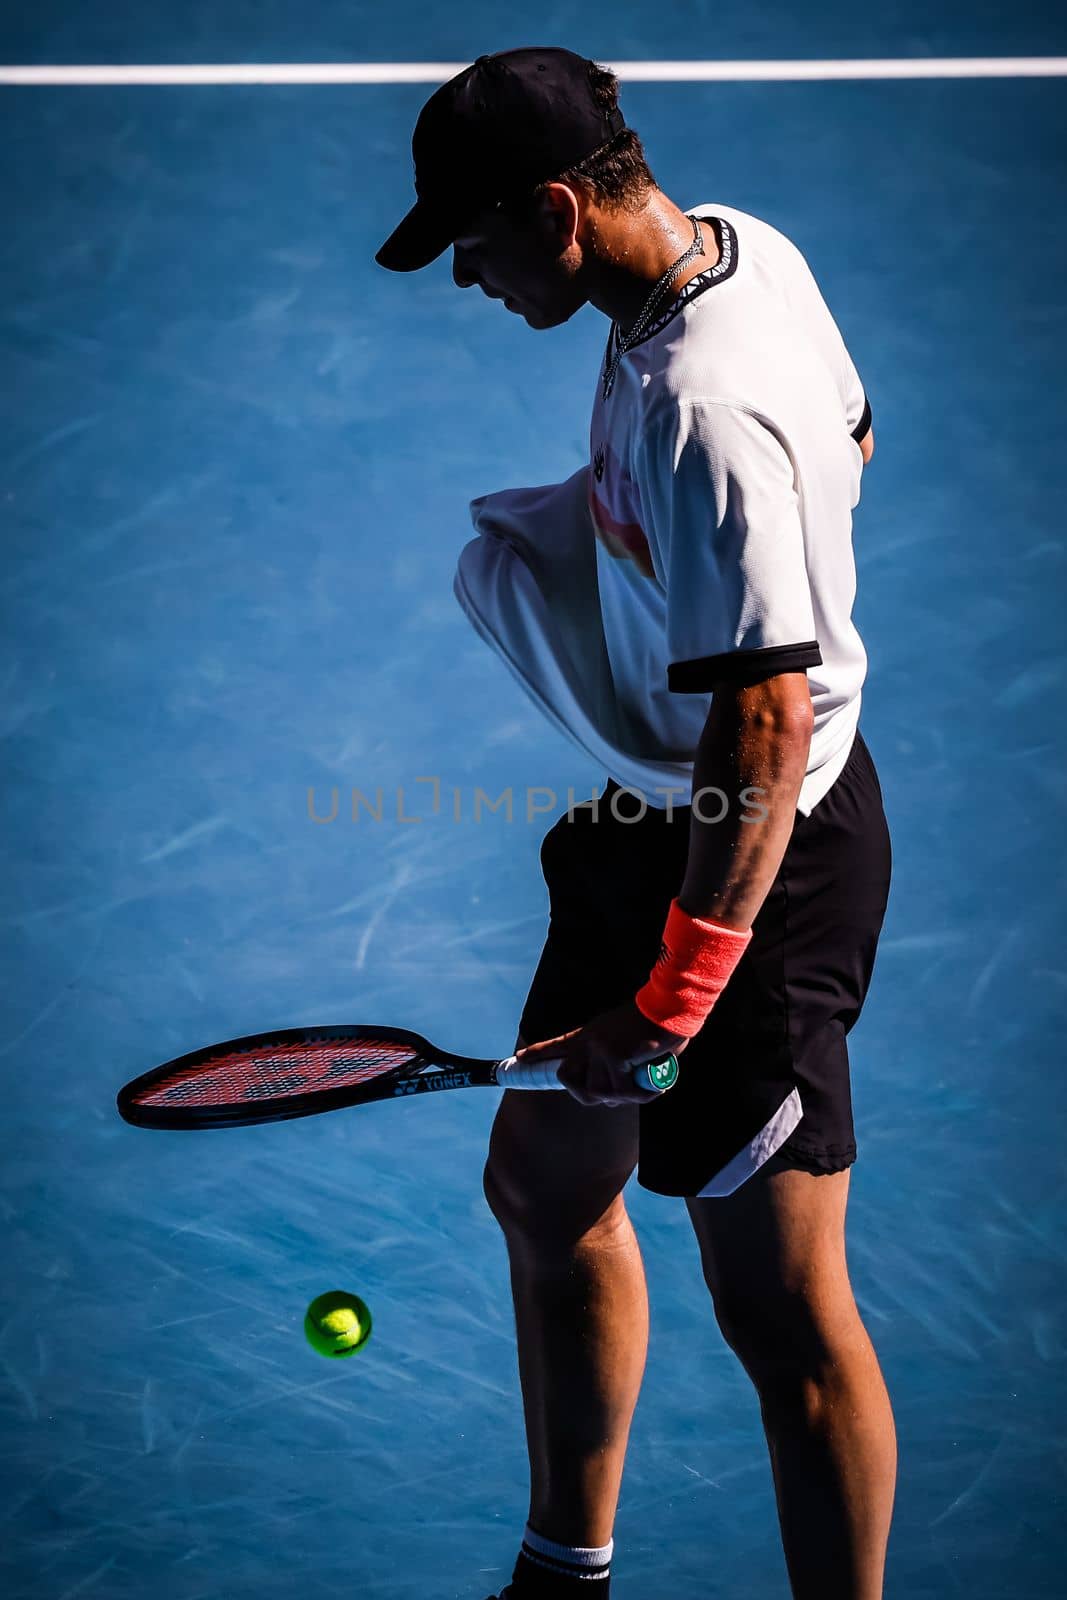 MELBOURNE, AUSTRALIA - JANUARY 23: Ben Shelton of USA plays J.J. Wolf of USA in the 4th round on day 8 of the 2023 Australian Open at Melbourne Park on January 23, 2023 in Melbourne, Australia.